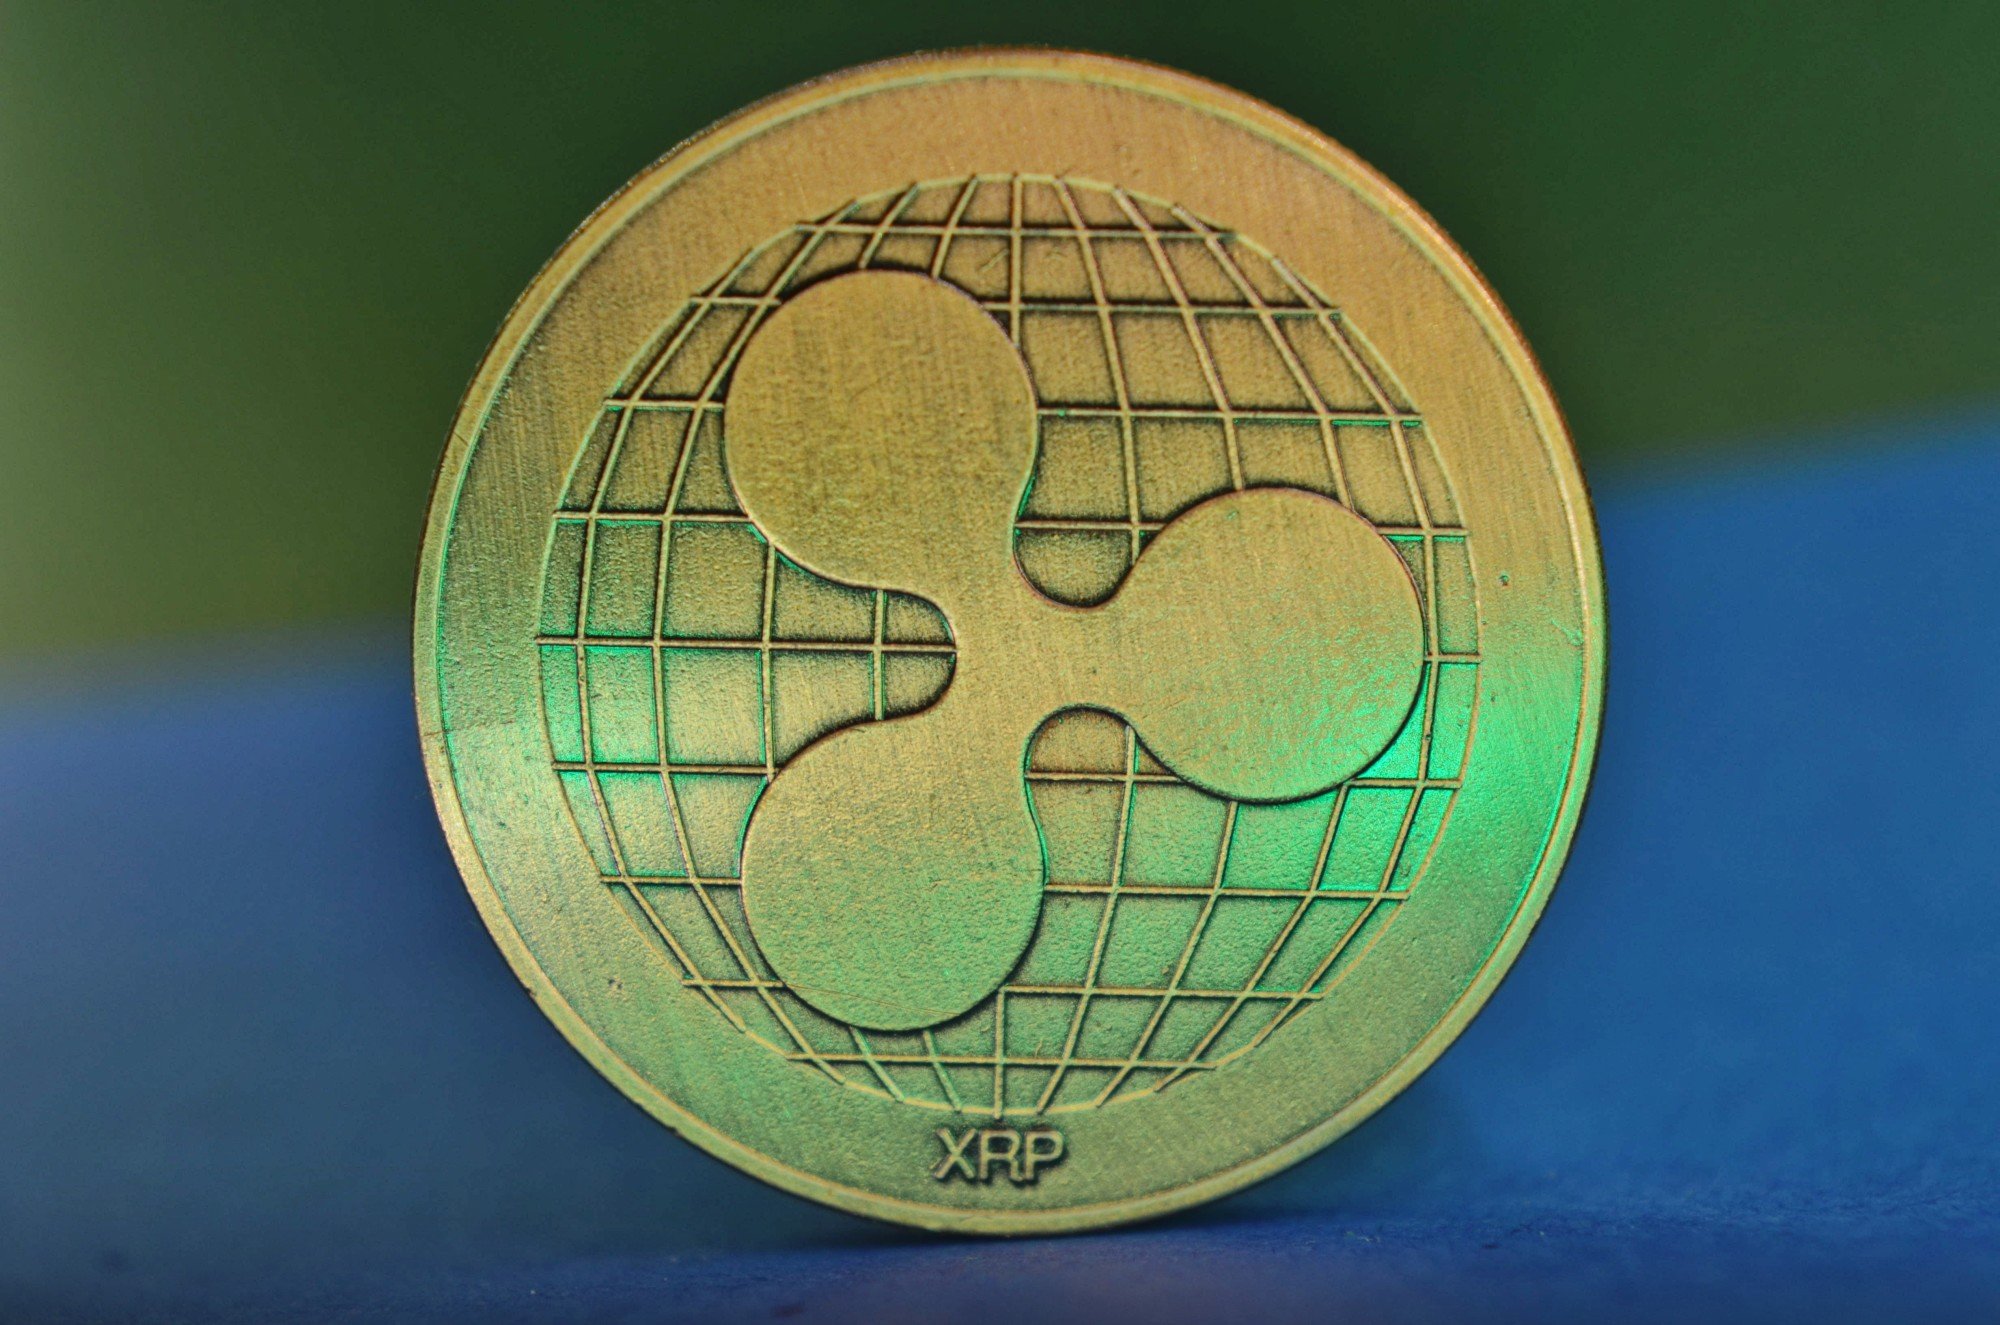 XRP Ripple Sec Lawsuit: What You Need to Know